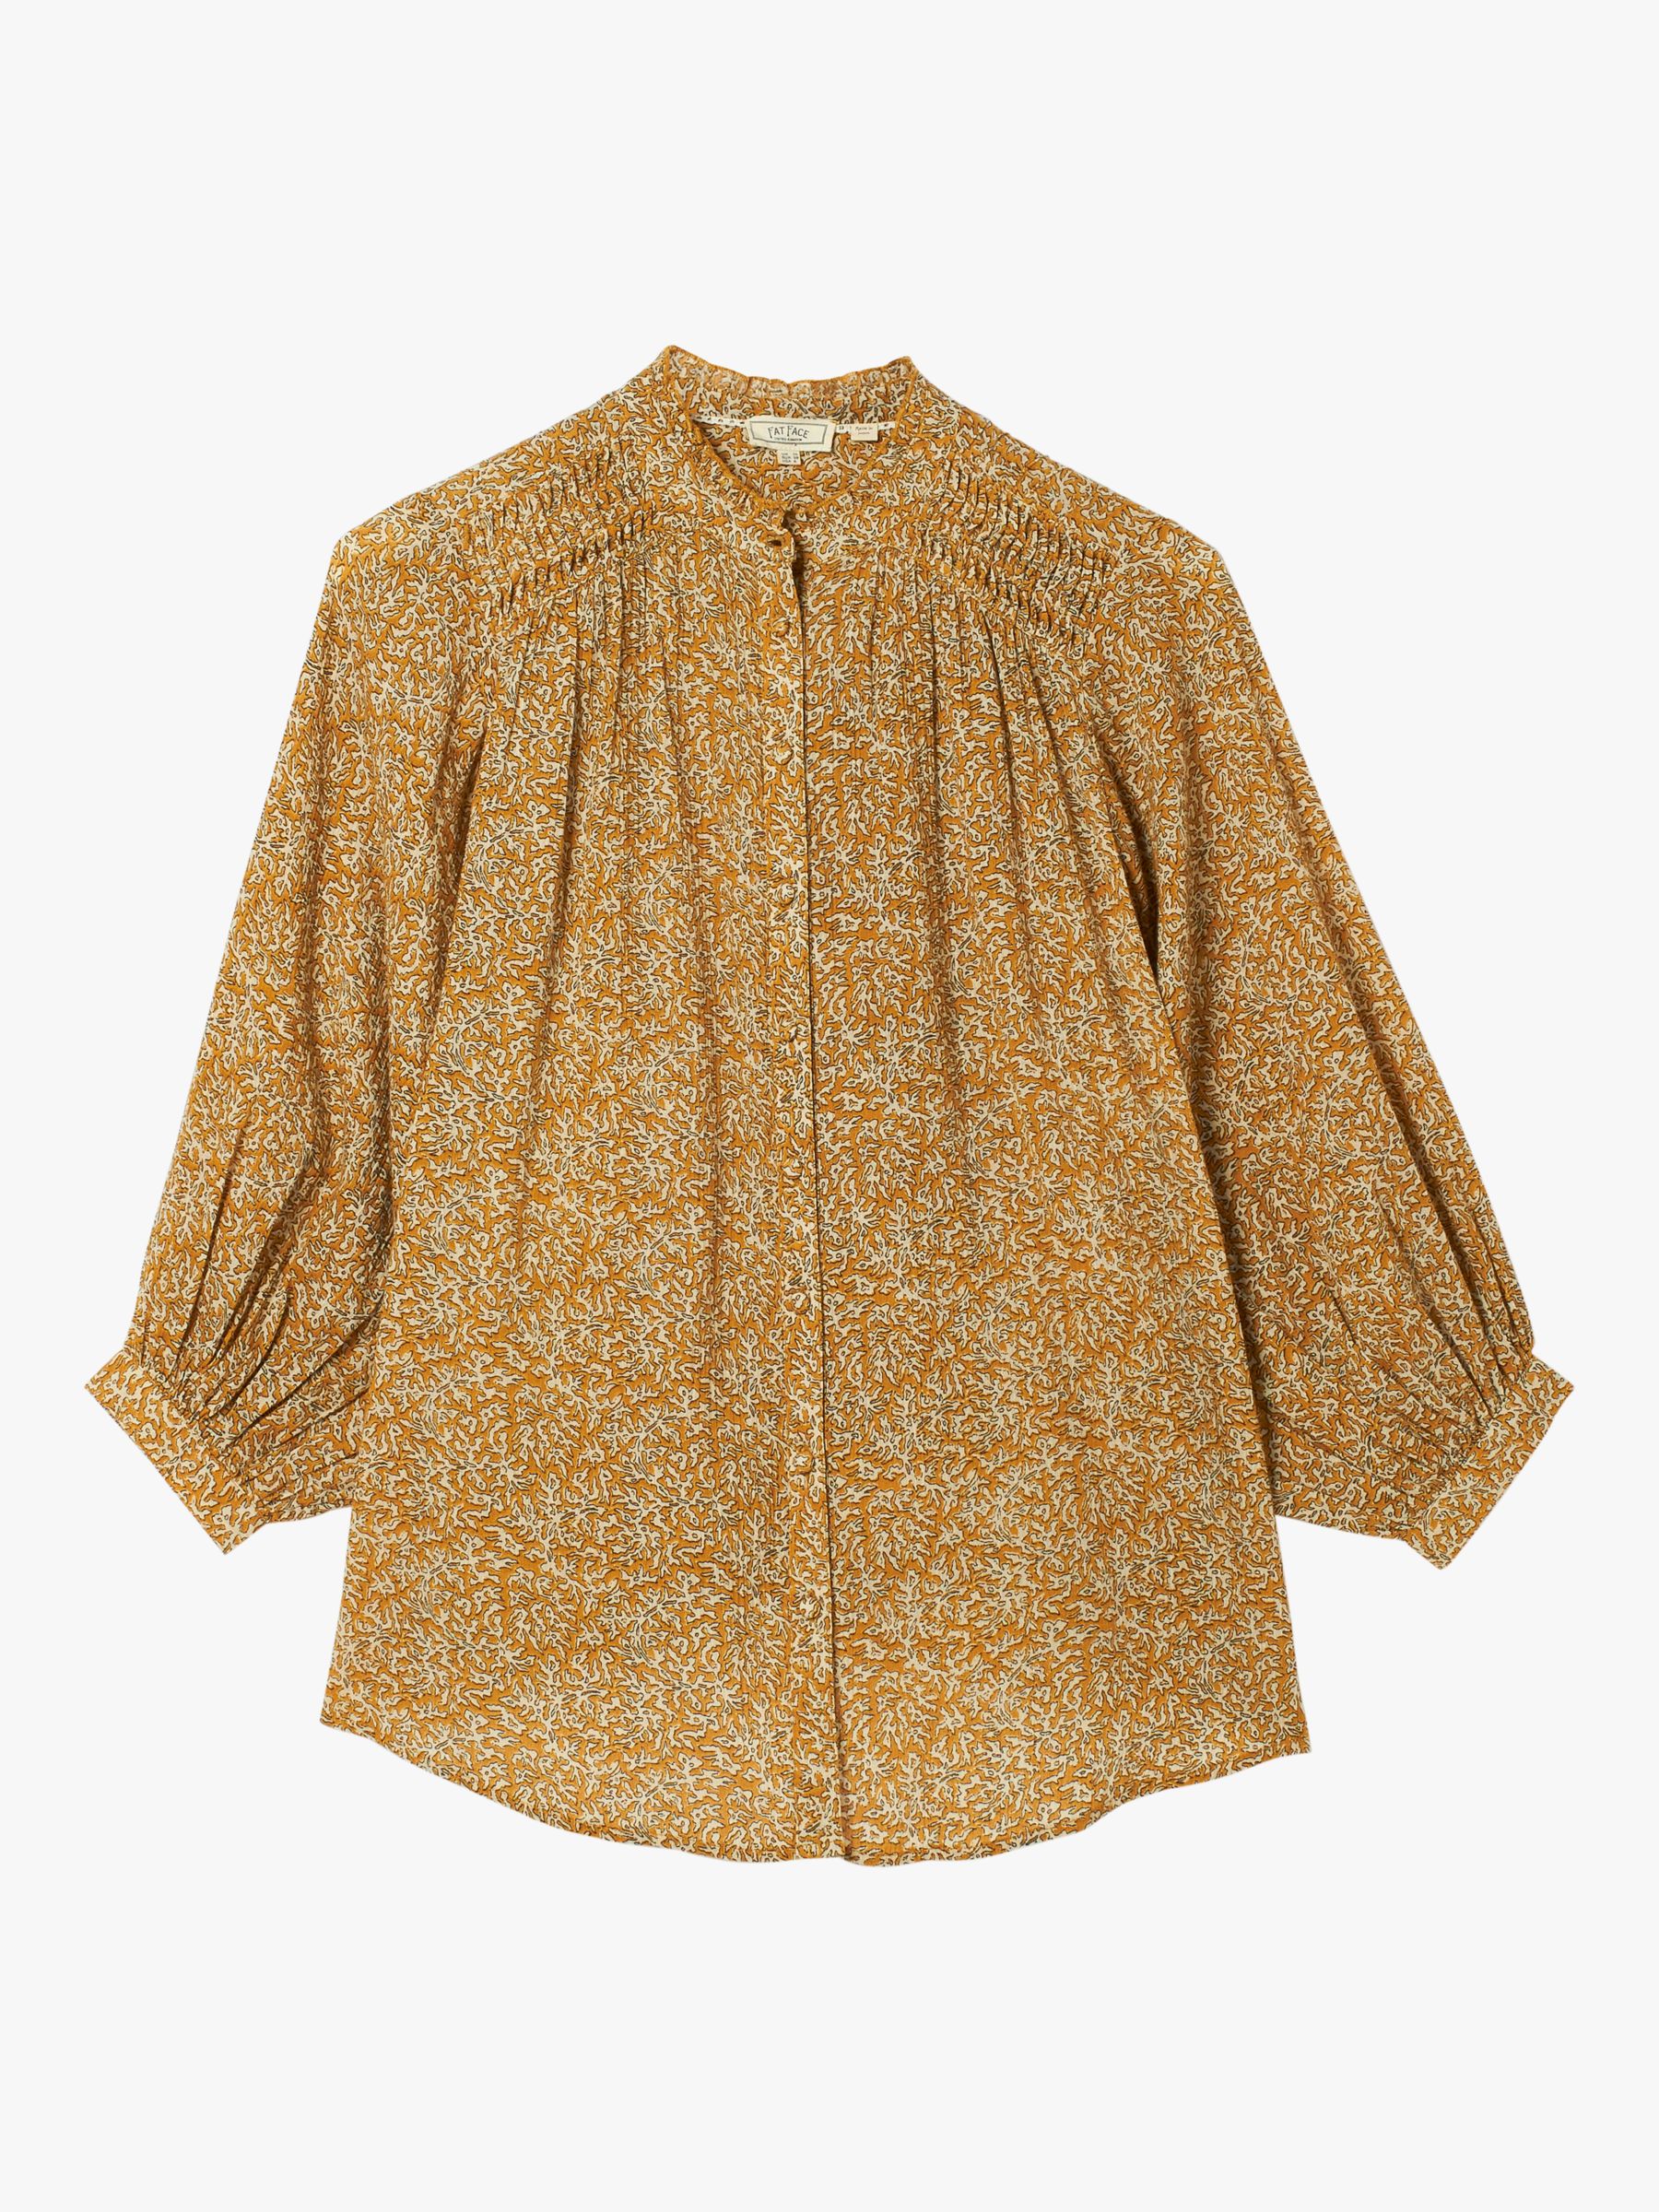 FatFace Evelyn Ditsy Floral Print Blouse, Yellow/Multi at John Lewis ...